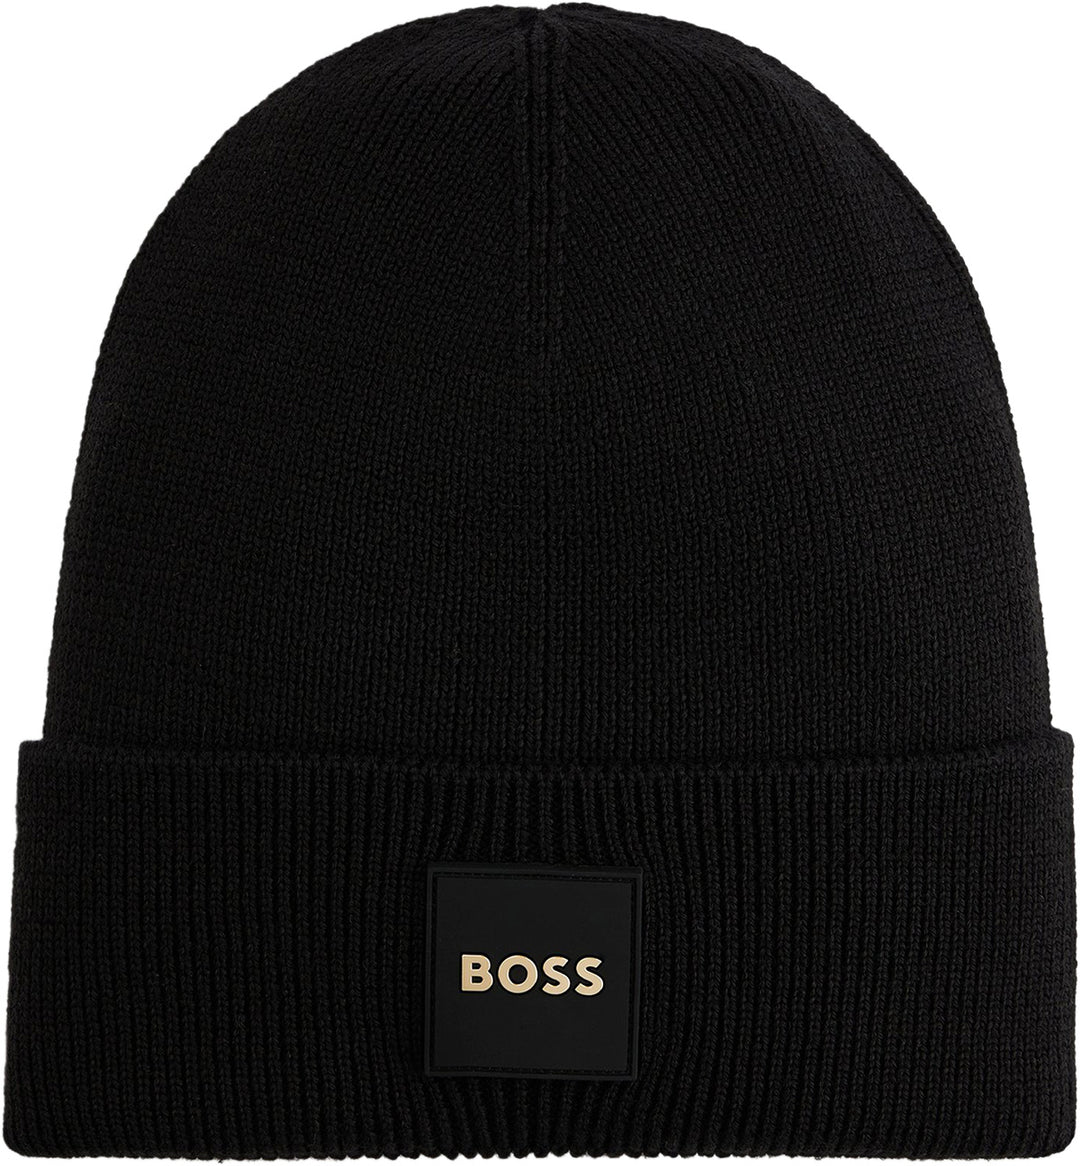 Boss Furio In Black Gold, Ribbed Knitted Beanie Hat